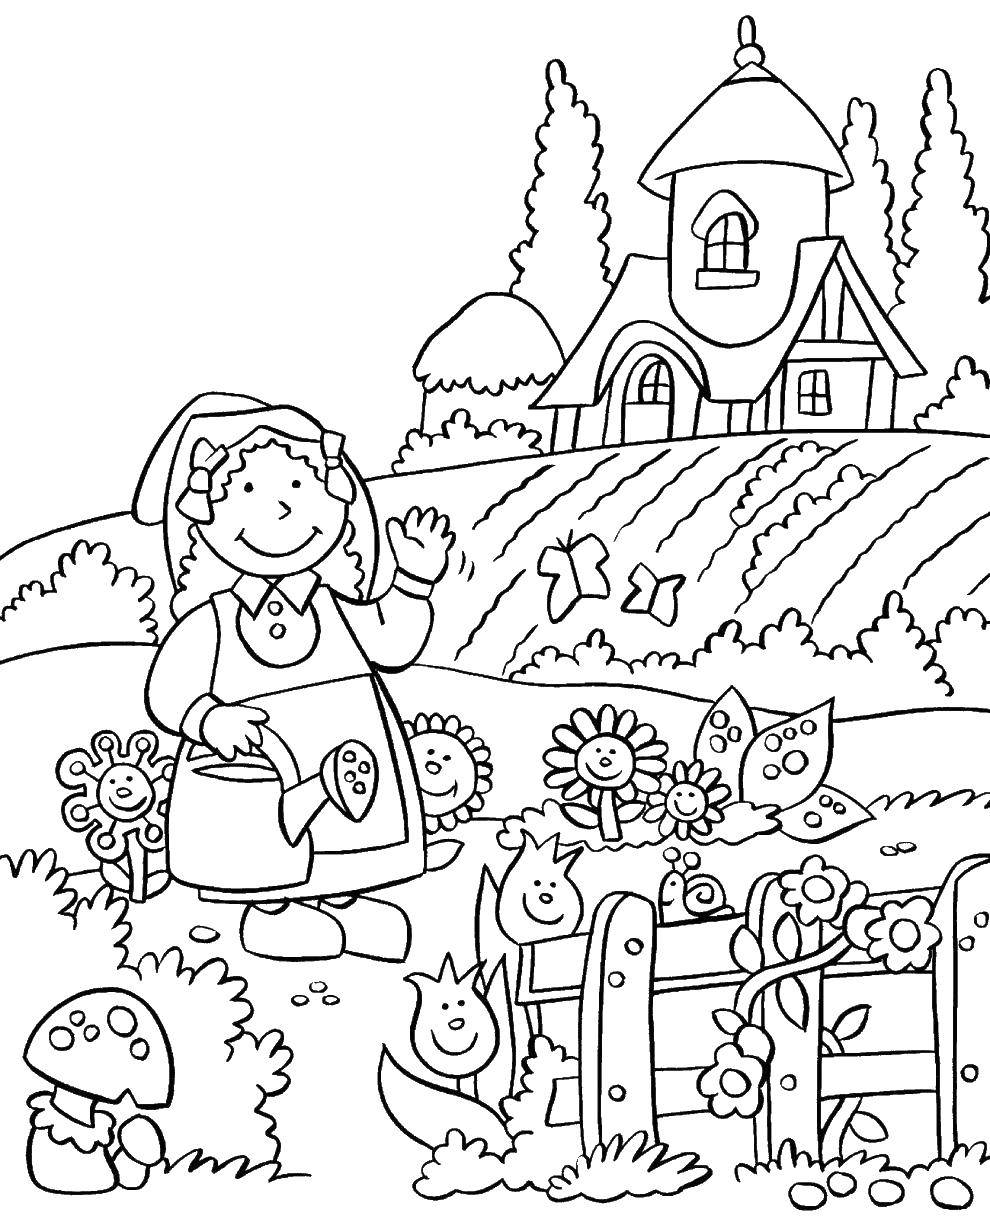 Coloring Girl watering flowers. Category plants. Tags:  plants, flowers, garden, vegetable garden.